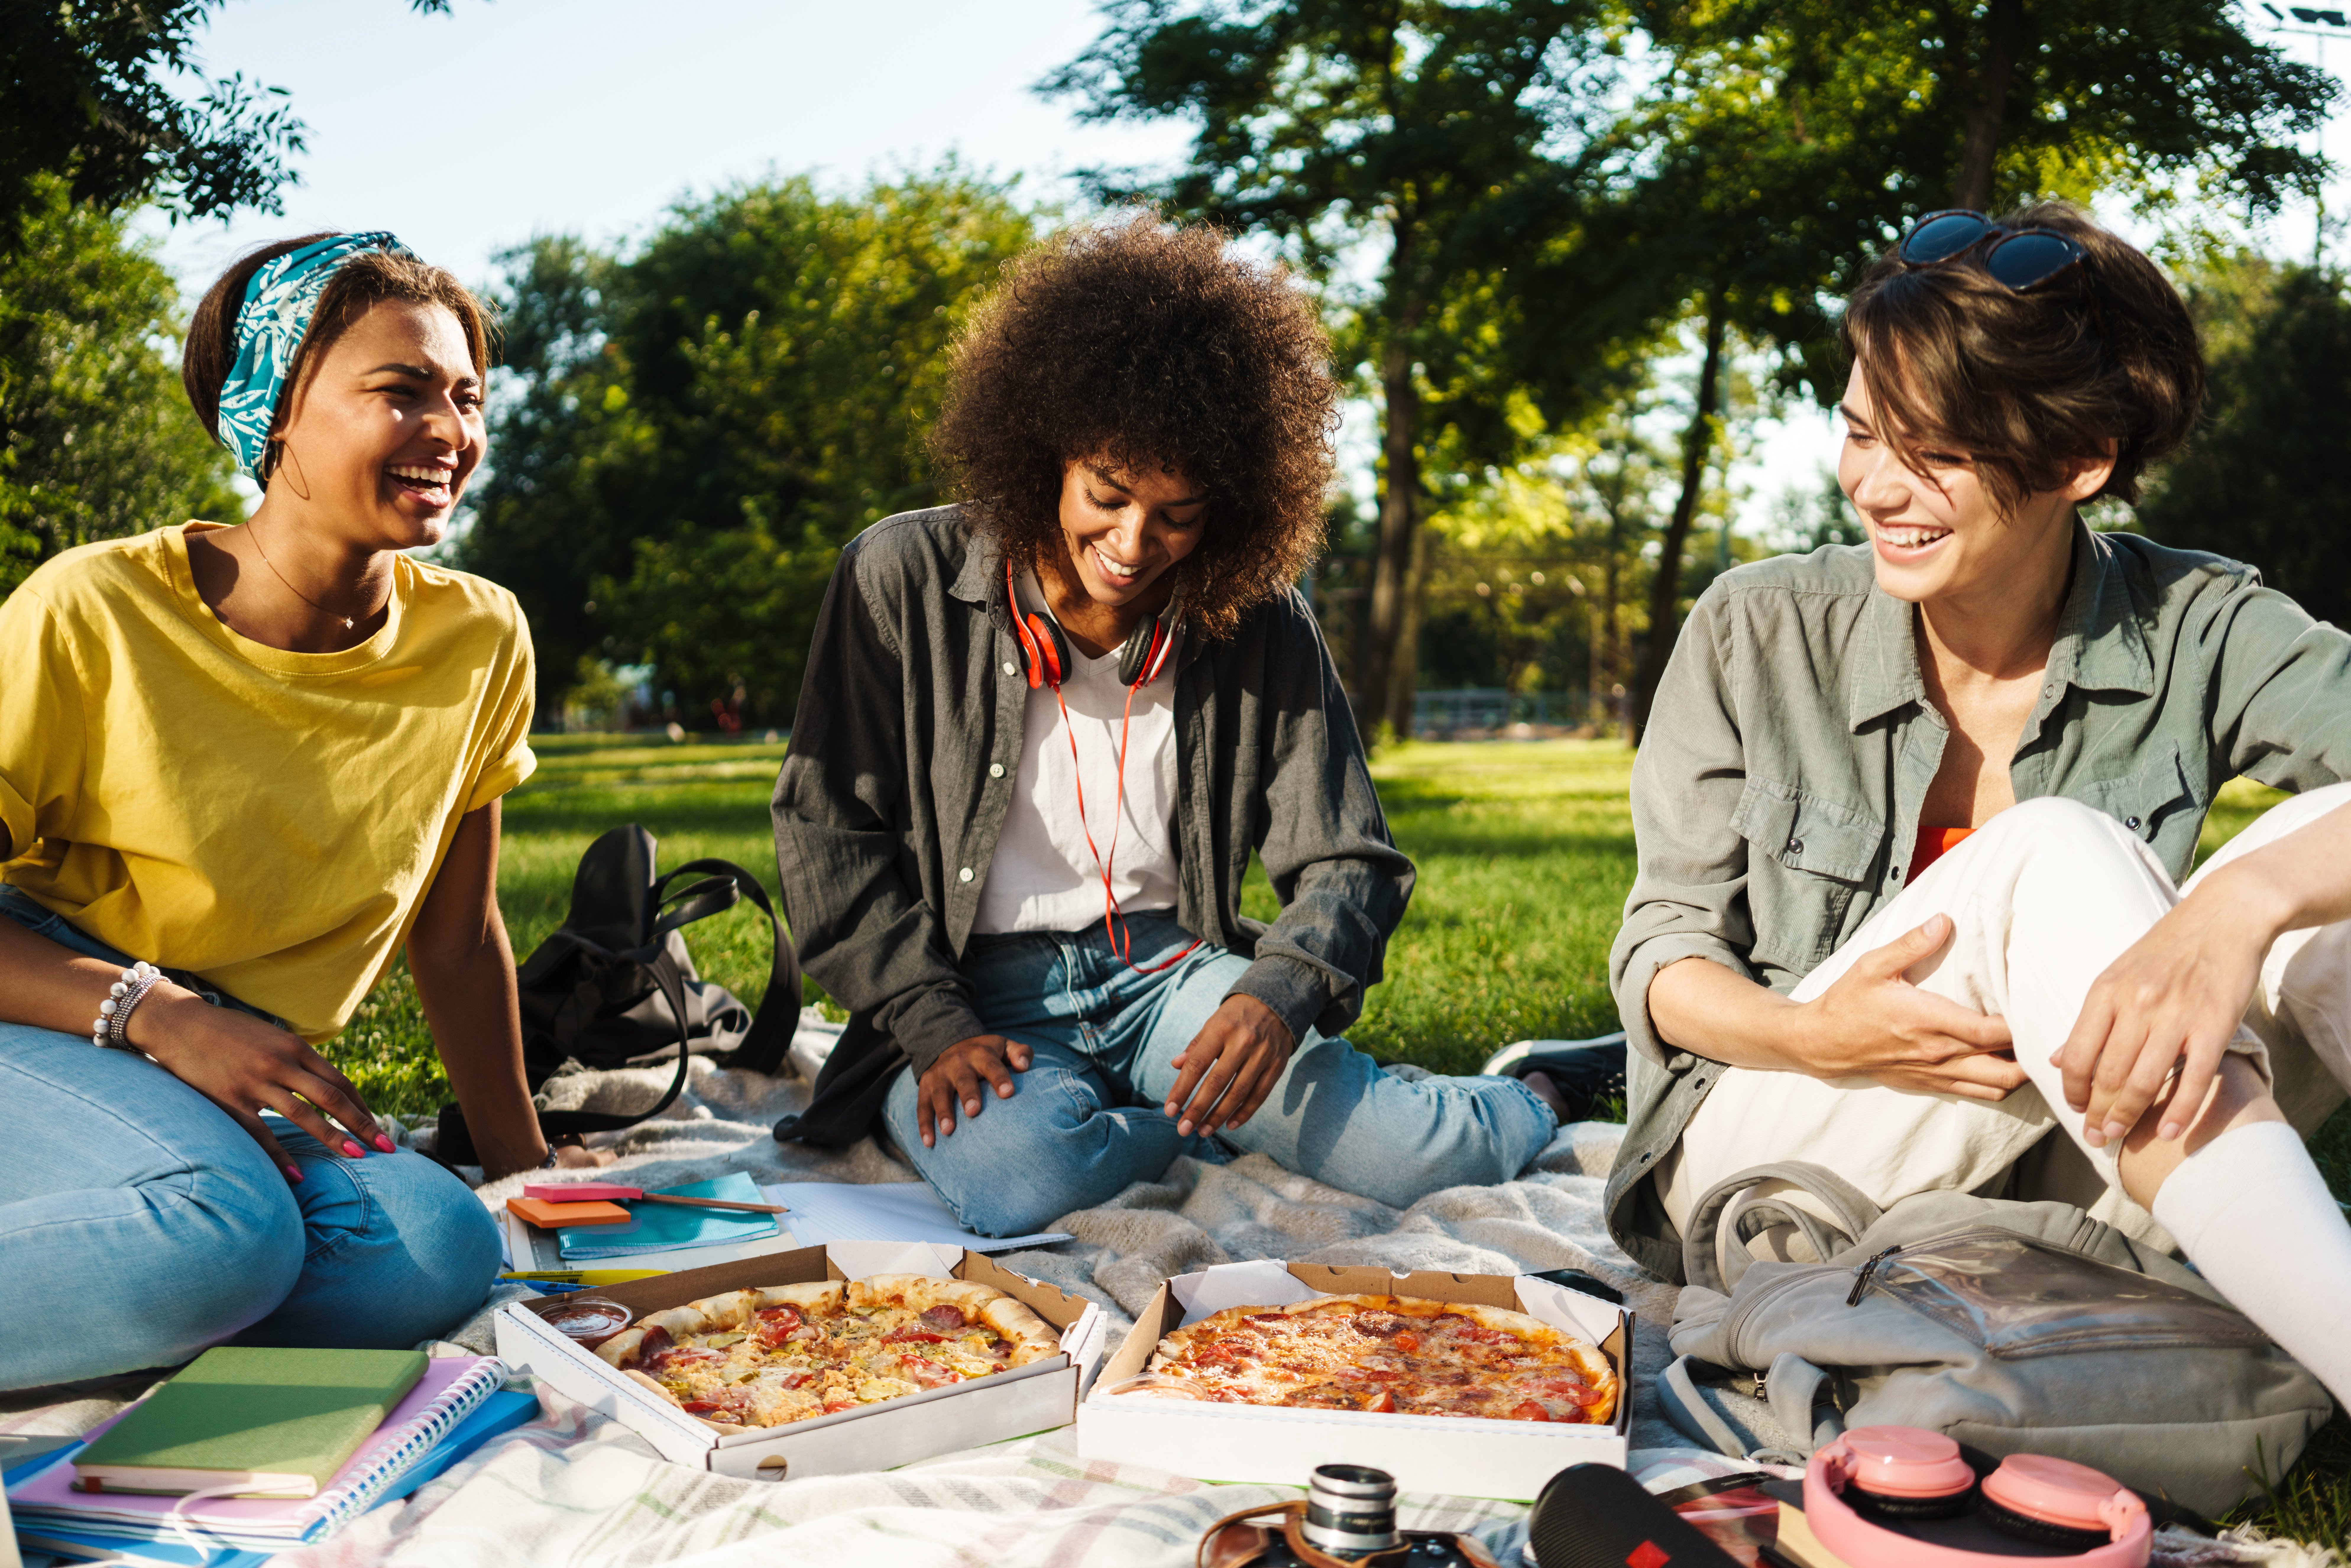 group-of-three-women-having-a-picnic-outside-in-warm-sunny-weather